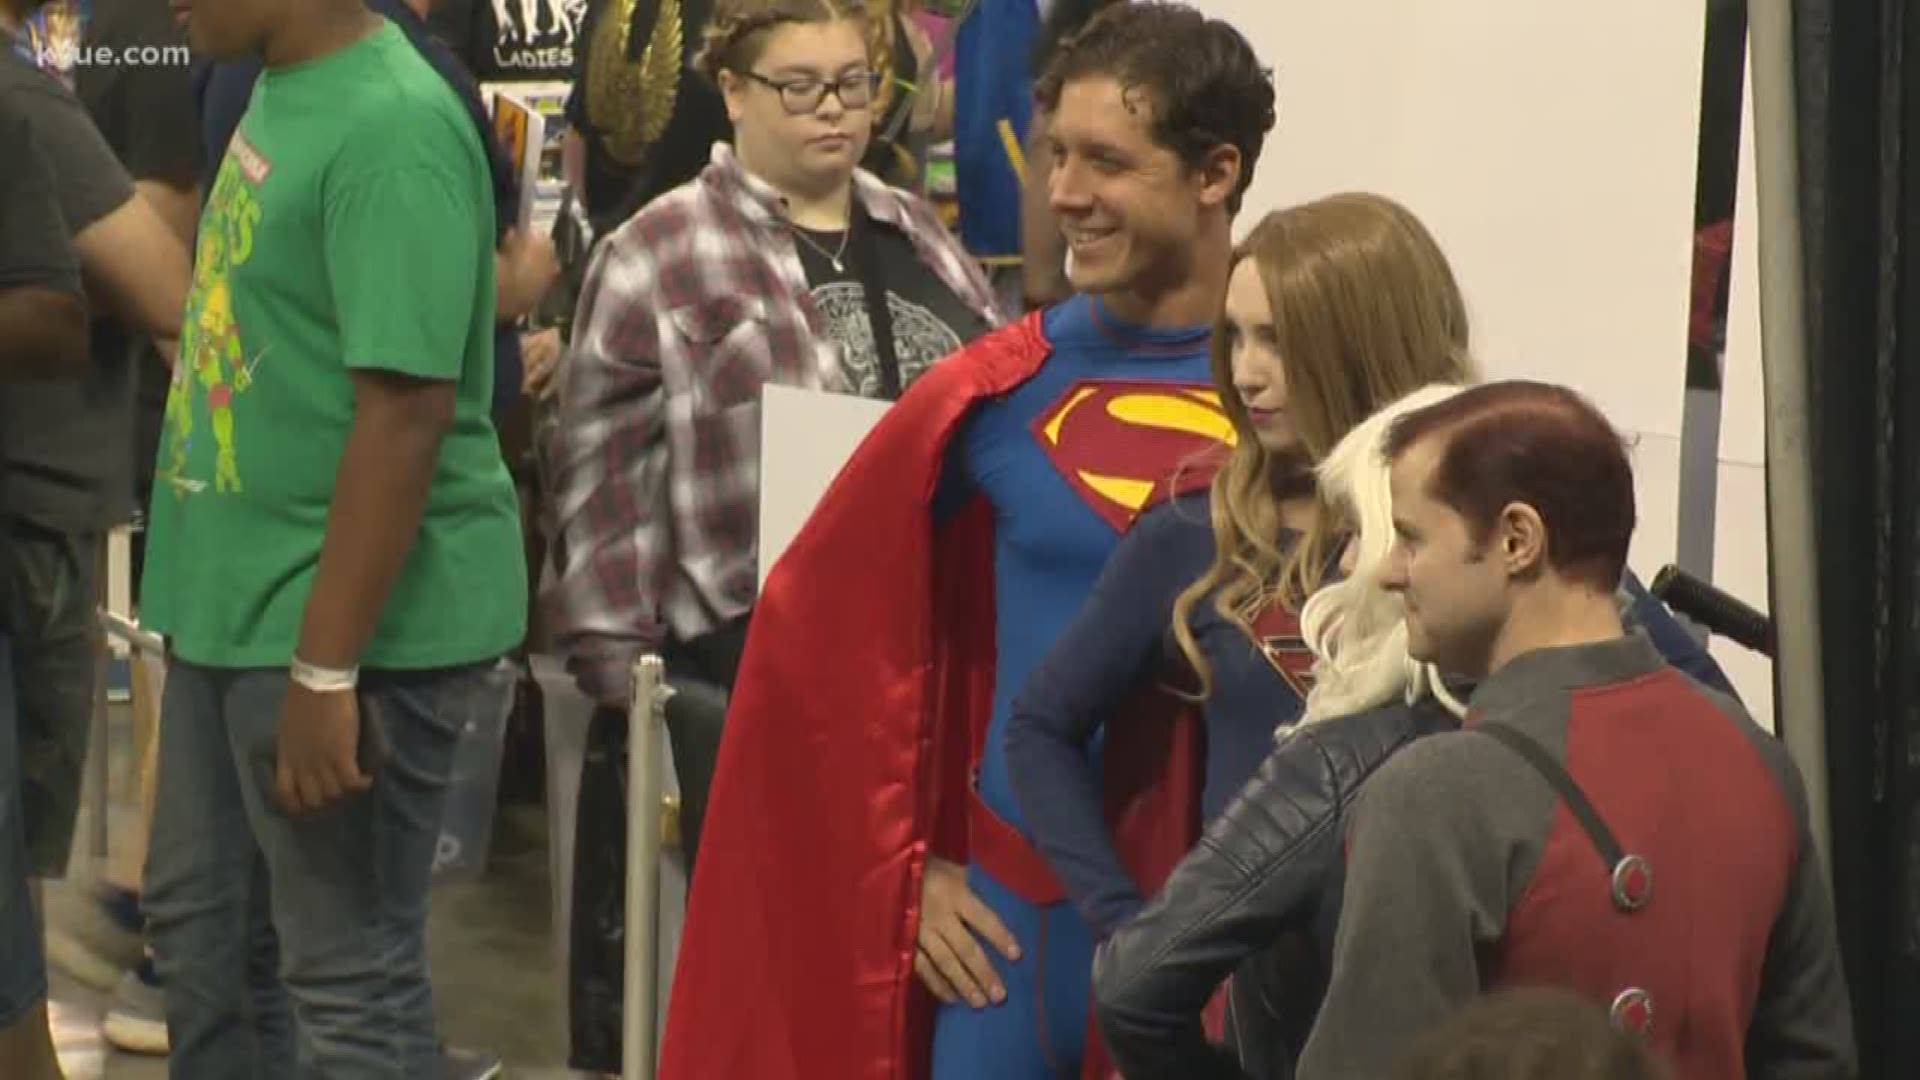 It's not often you get to see all of your favorite comic book characters under one roof -- especially in Cedar Park.